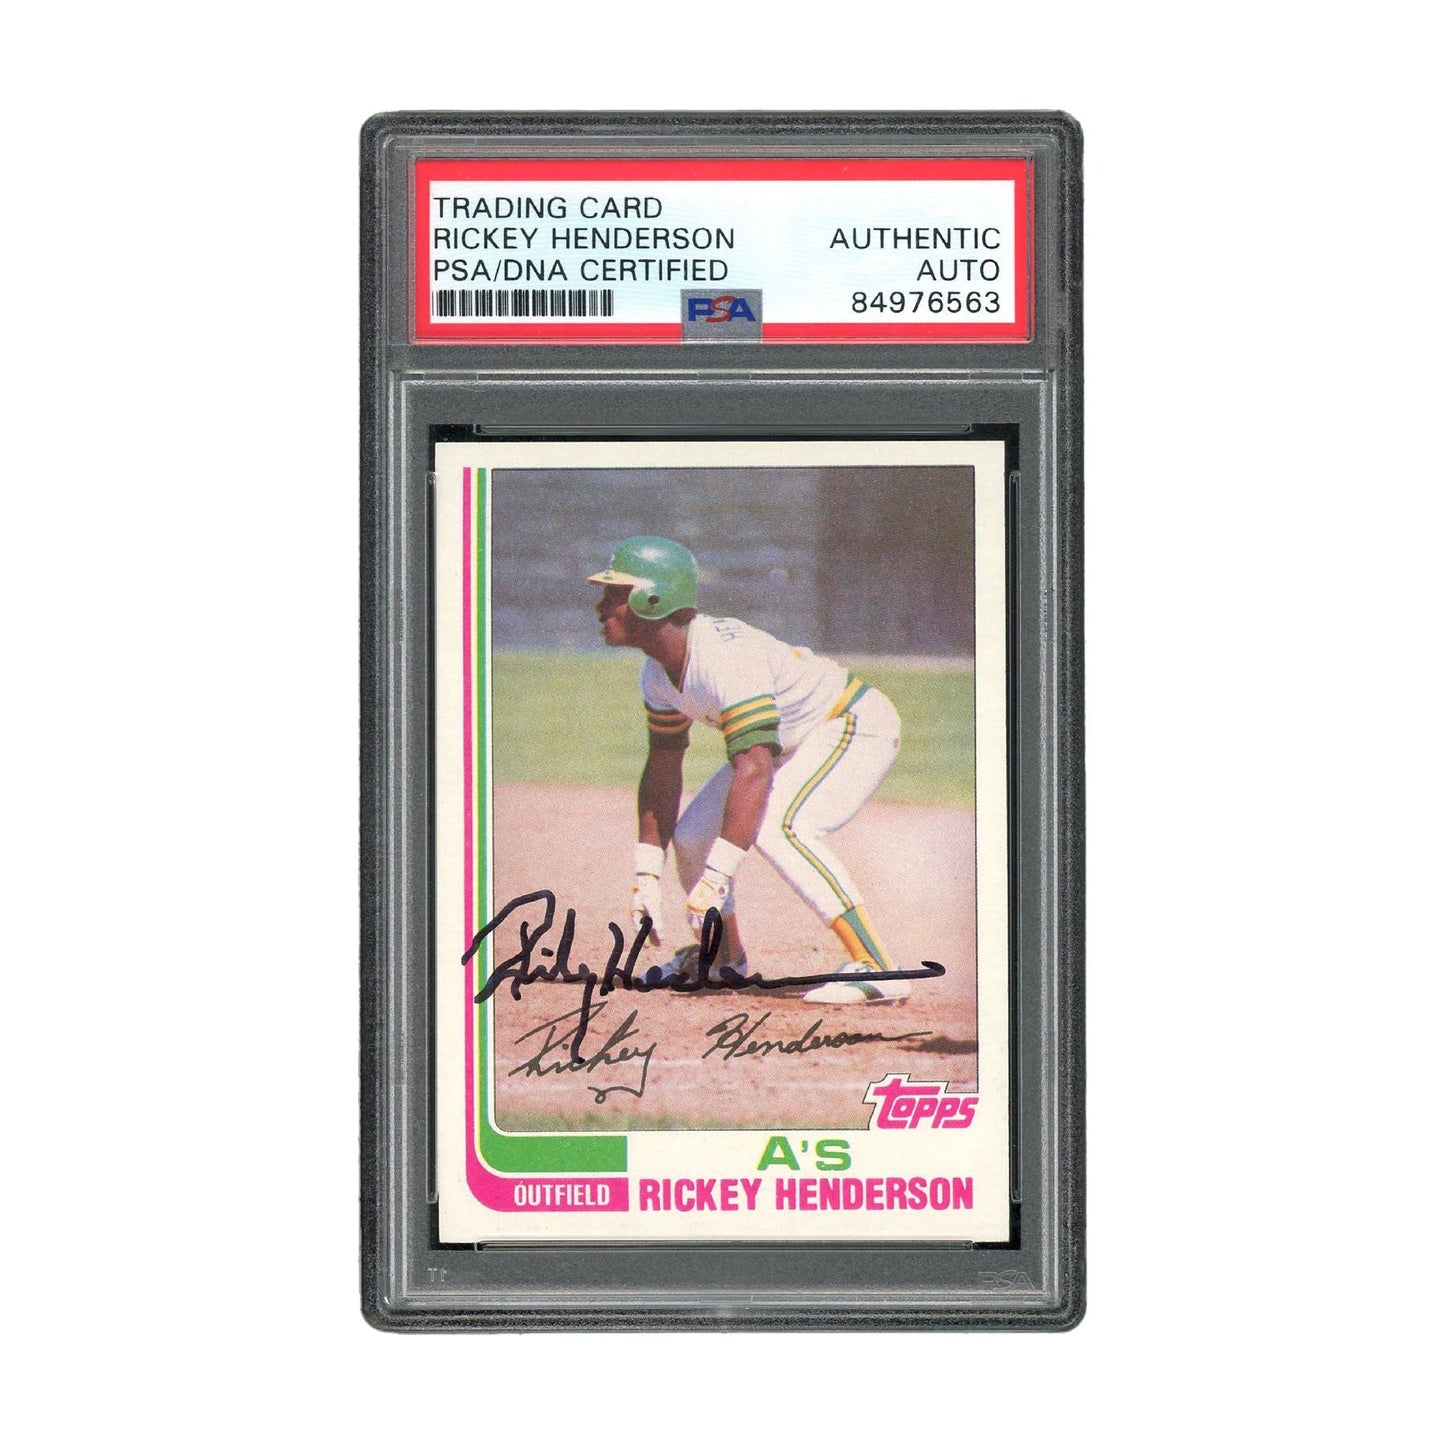 Rickey Henderson Autographed 1982 Topps Card Authentic Auto - PSA